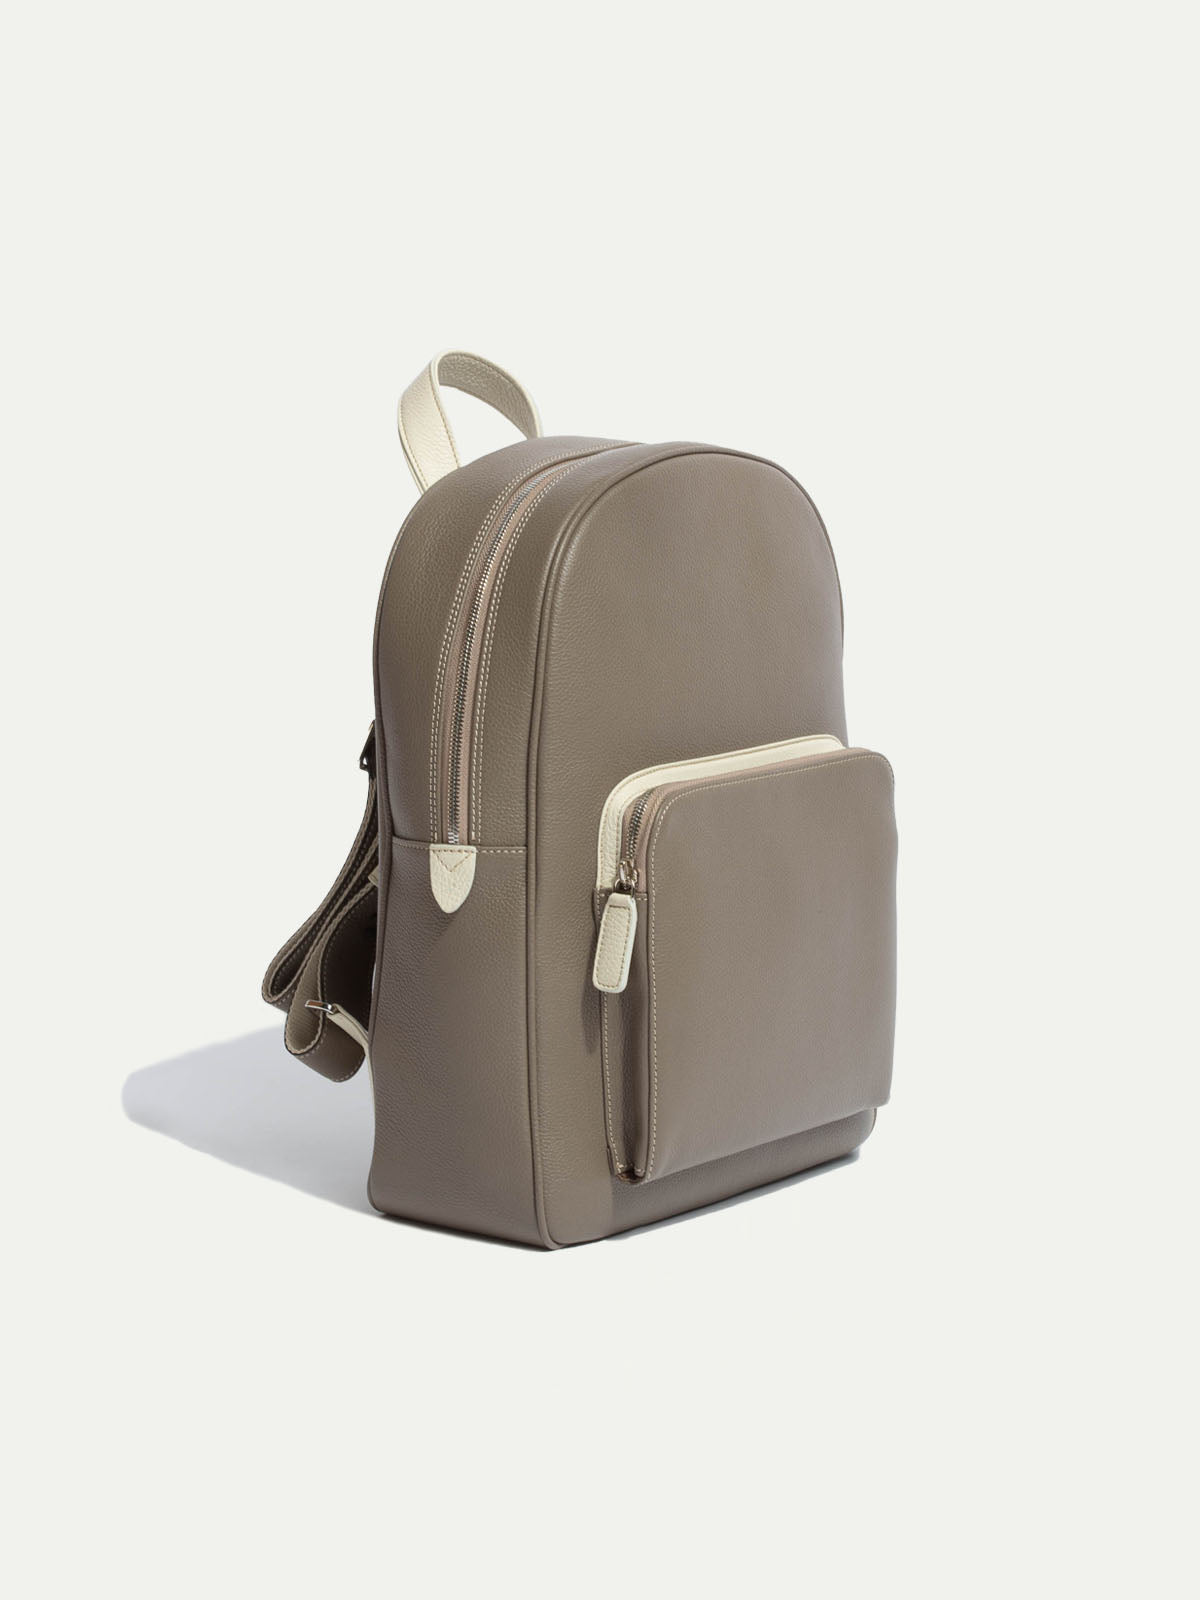 Sac à dos en cuir taupe - Made in Italy